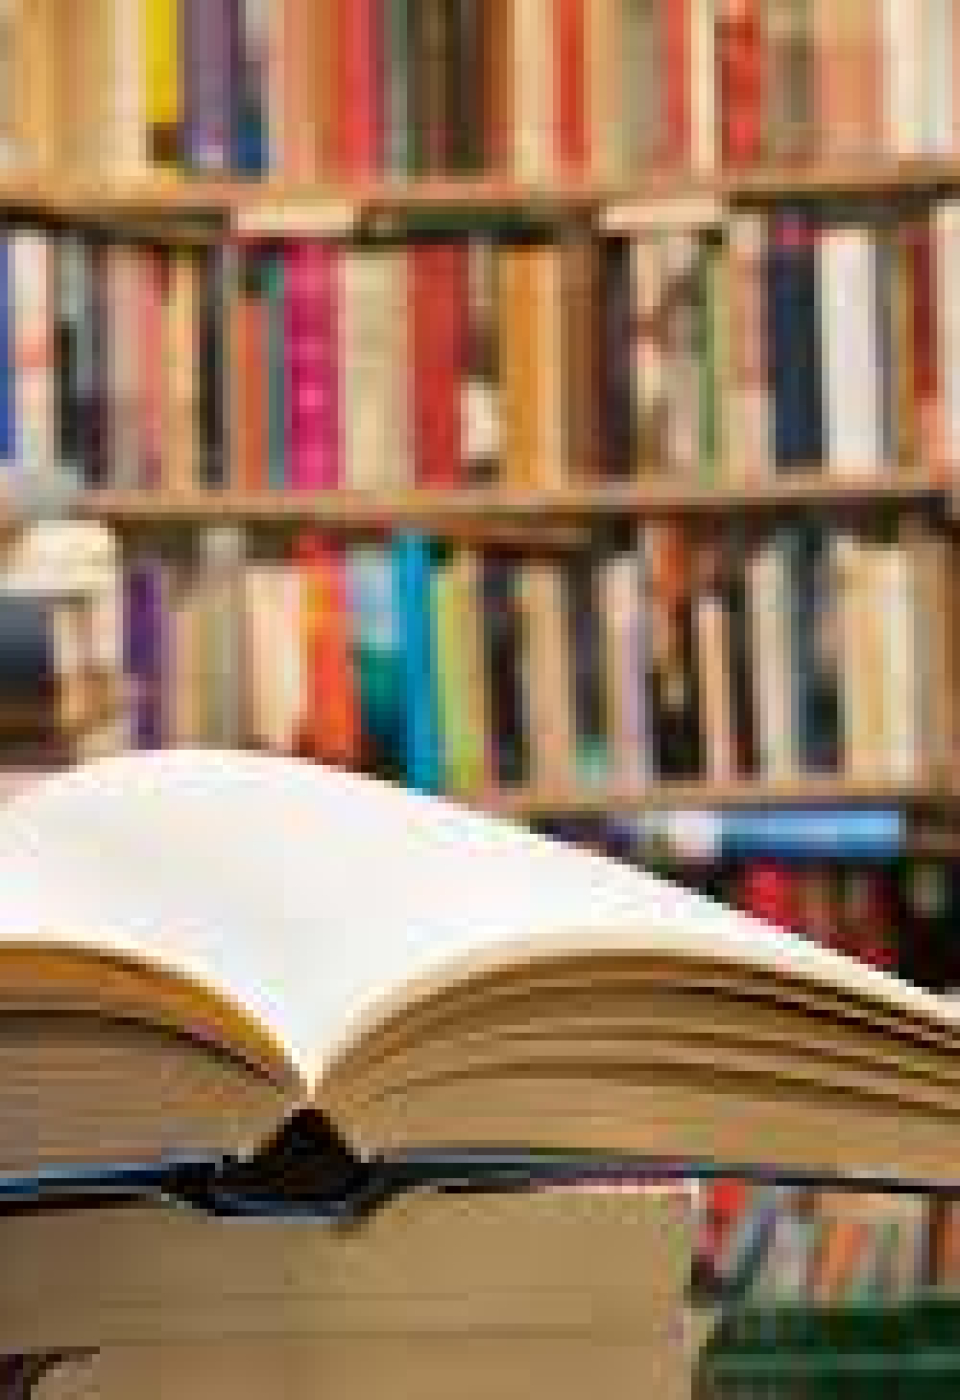 Top 10 books that will positively influence your life